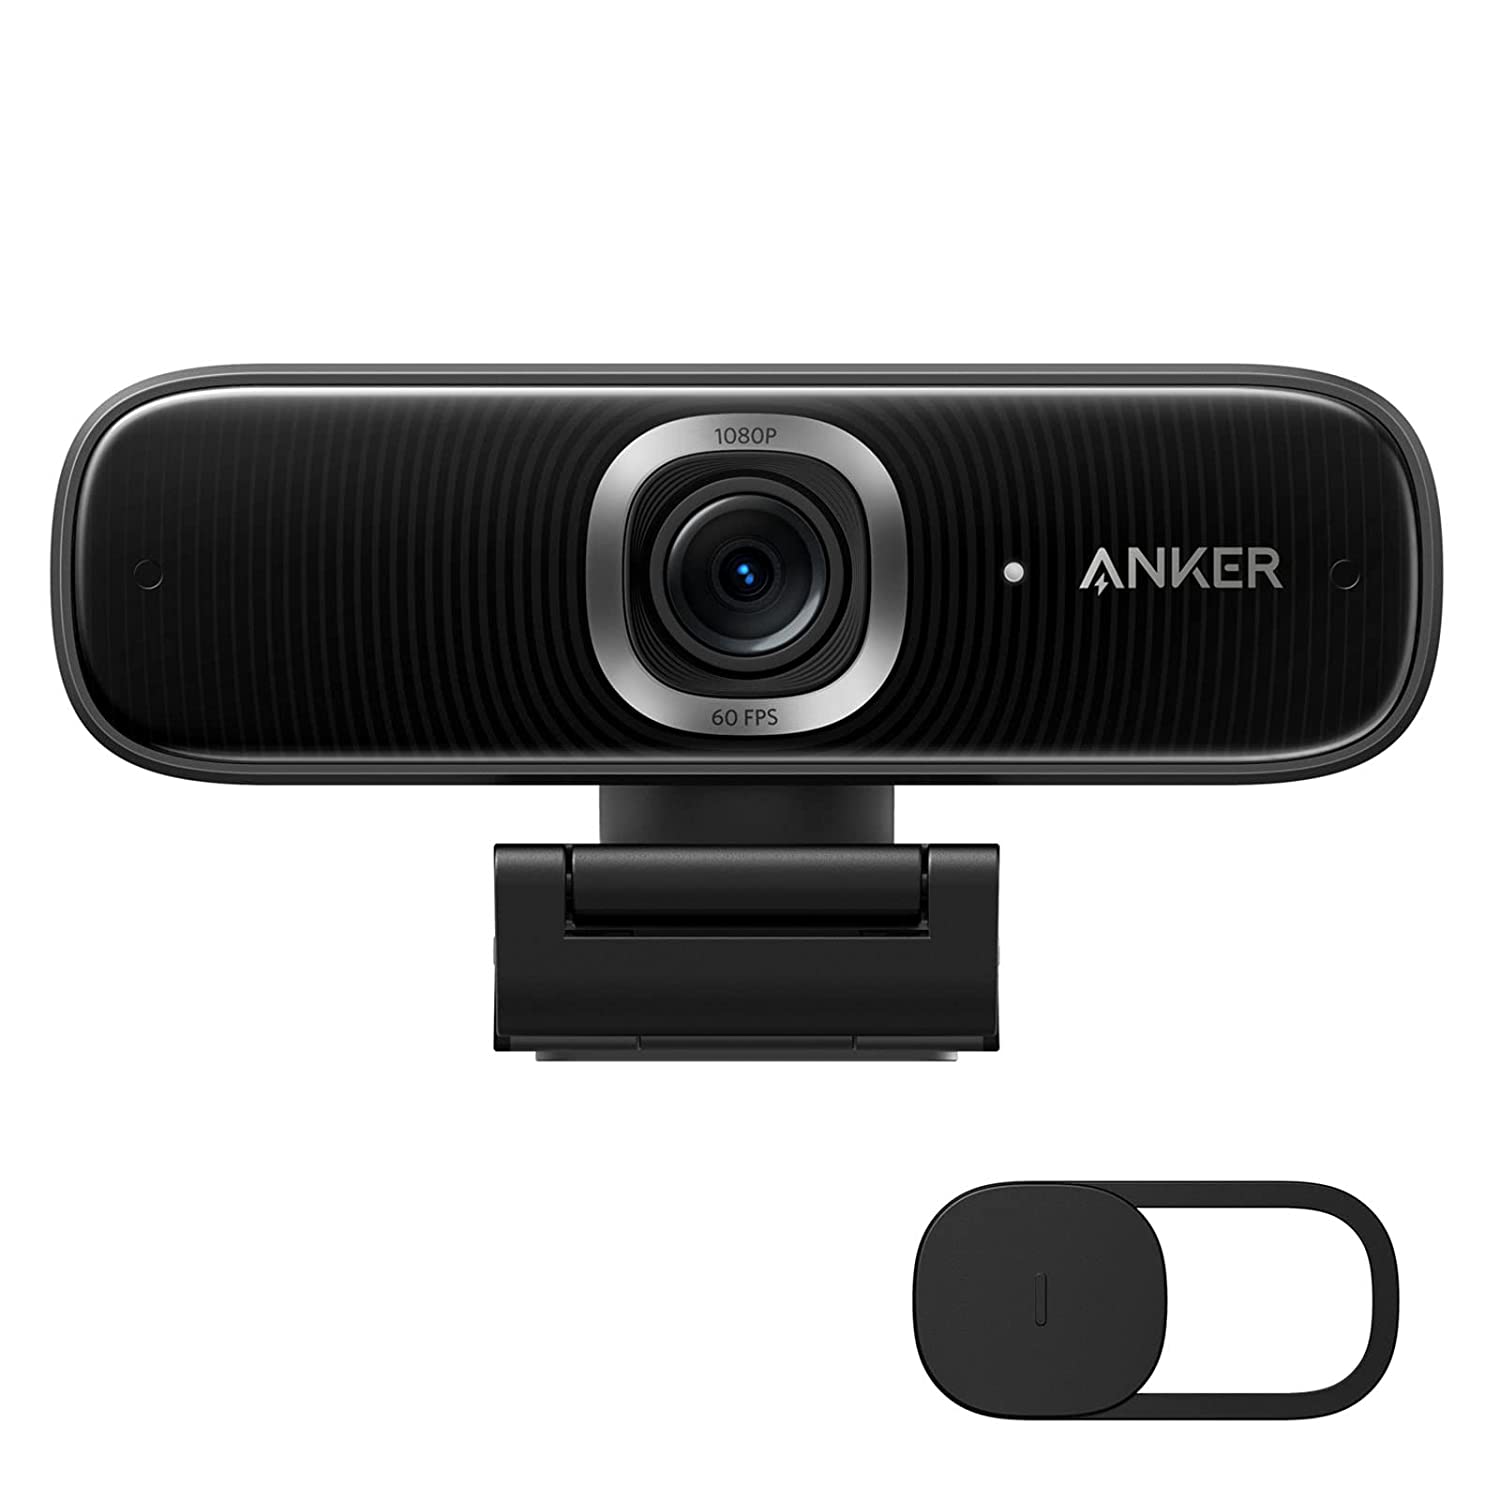 Anker PowerConf C300 Smart Full HD Webcam, AI-Powered Framing & Autofocus, 1080p Webcam with Noise-Cancelling Microphones, Adjustable FoV, HDR, 60 FPS, Low-Light Correction, Zoom Certified - Hatke